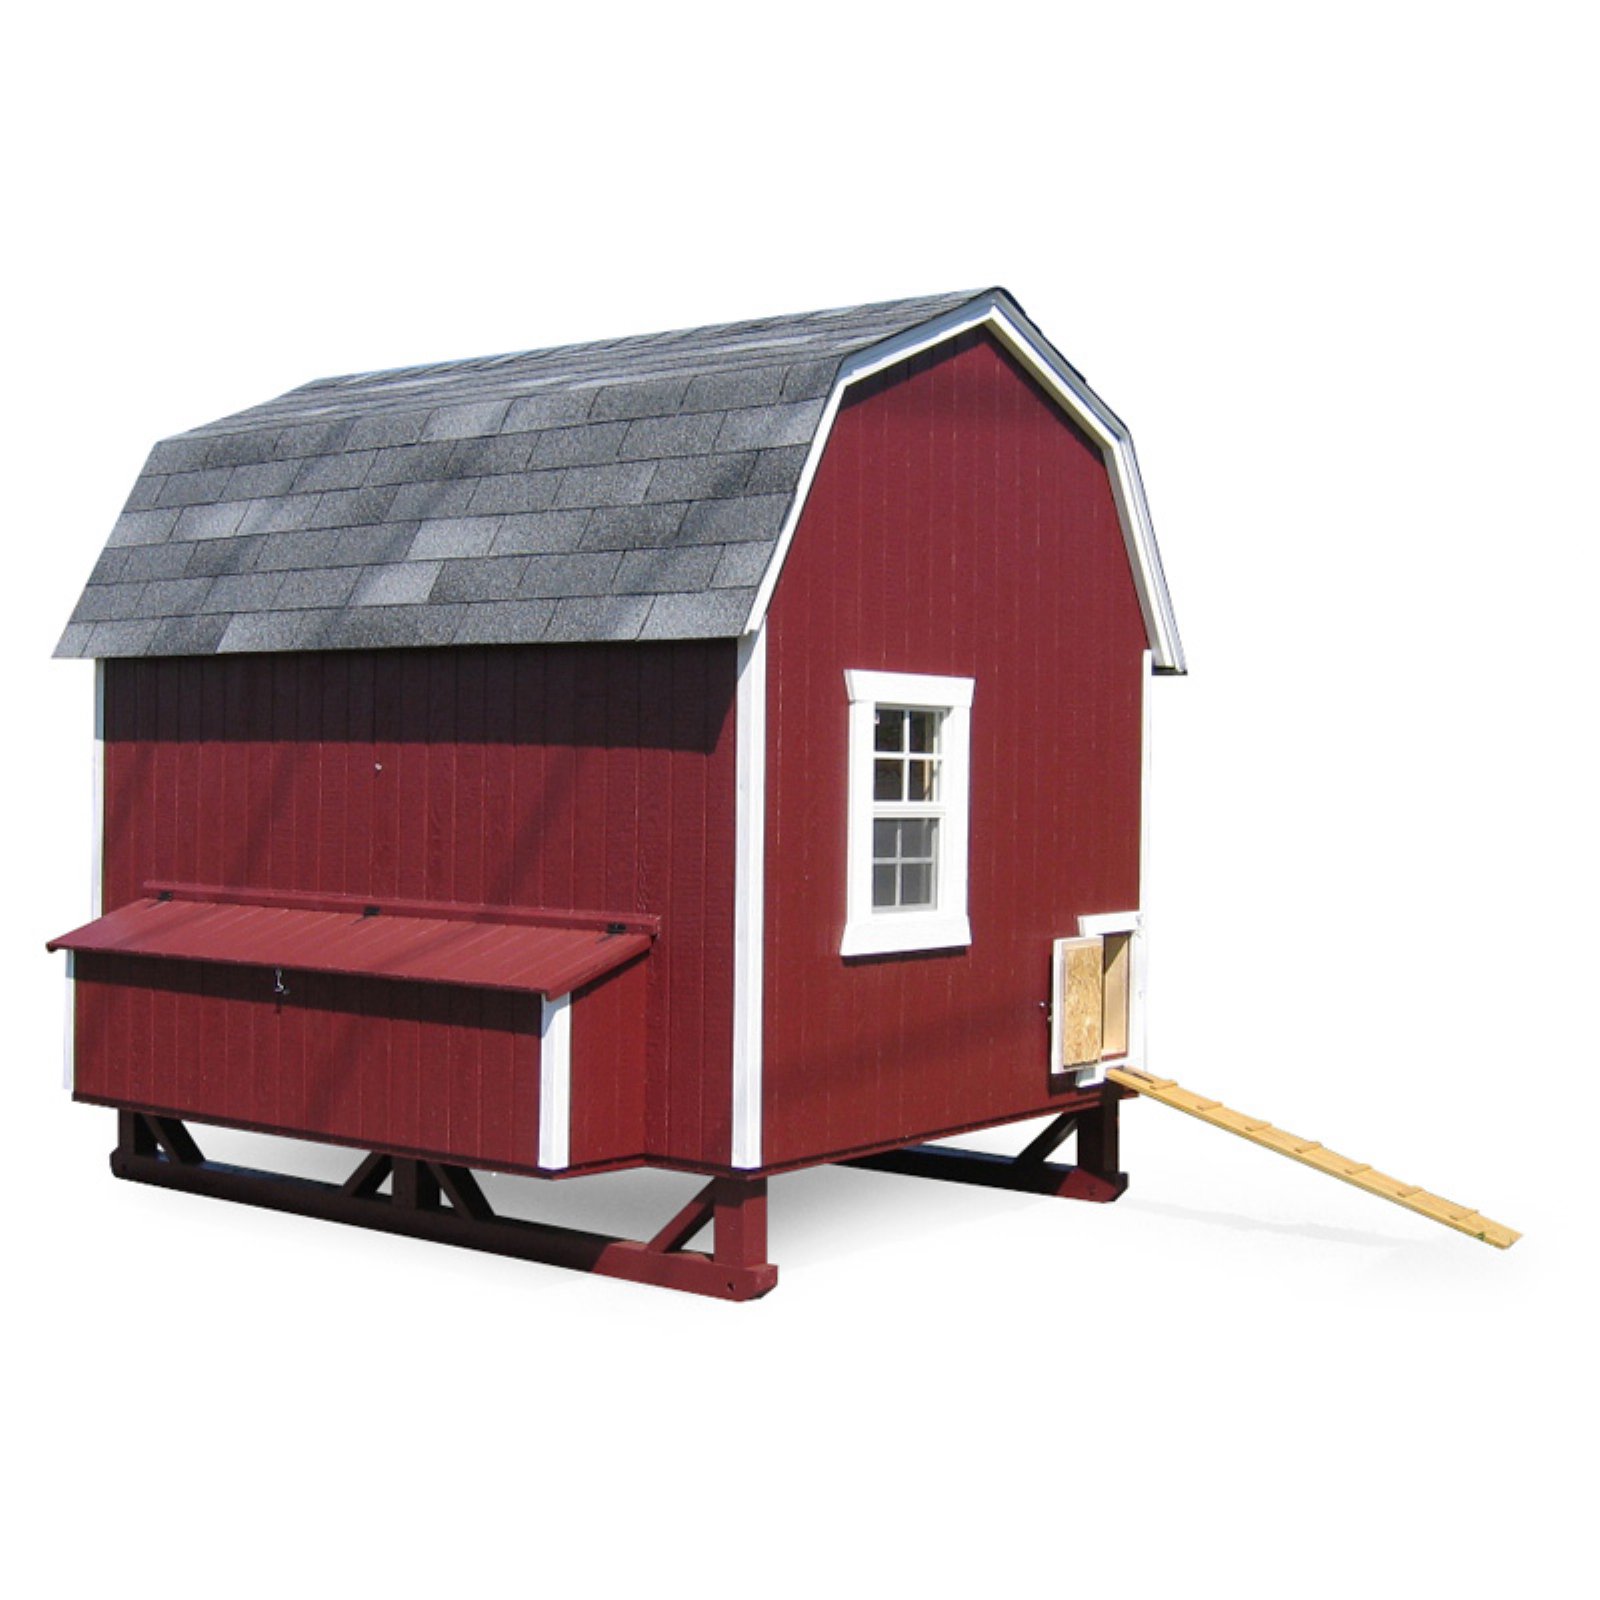 Little Cottage Unpainted Gambrel Barn Chicken Coop - Large 6 x 8 ft. - image 1 of 3